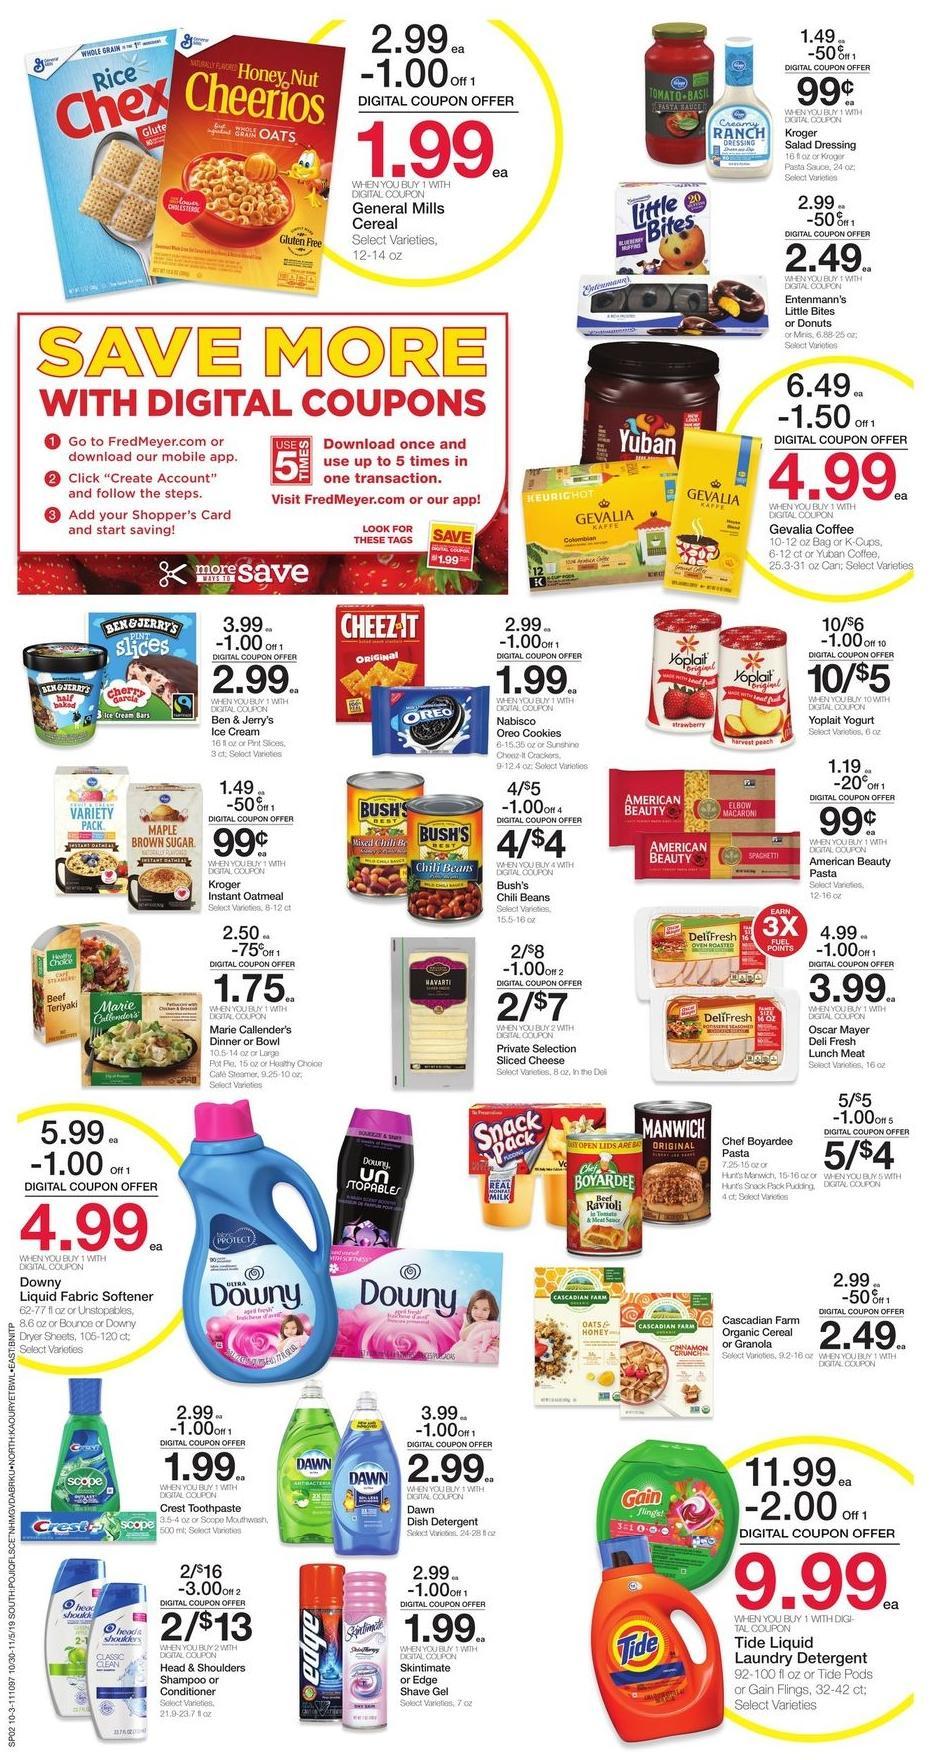 Fred Meyer Weekly Ad from October 30